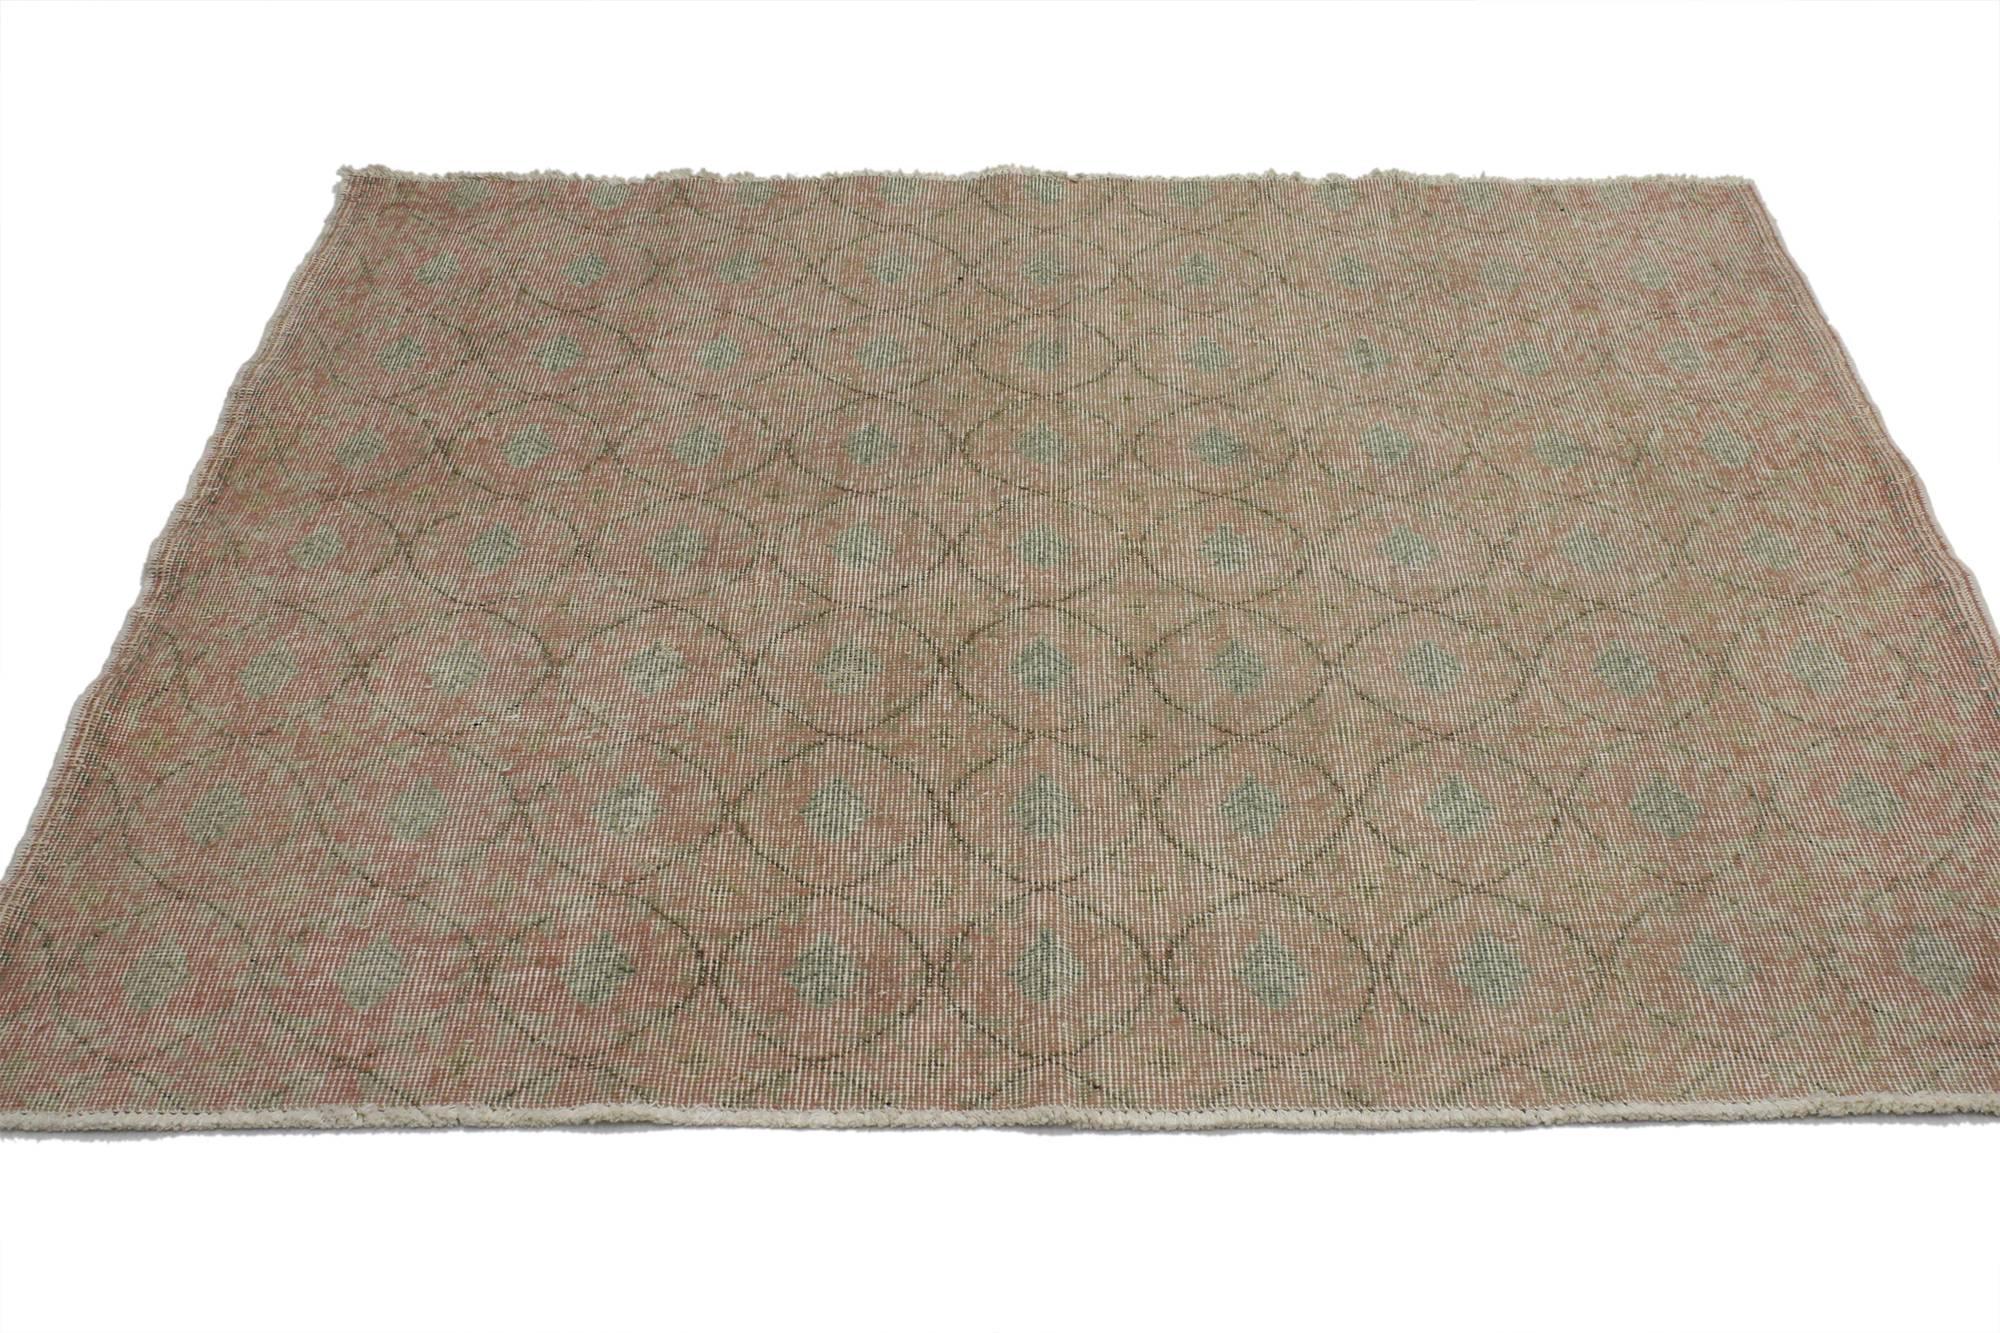 51984, Distressed Vintage Turkish Sivas Rug with Shabby Chic Rustic Farmhouse Style 04'05 x 05'02. ​​This distressed vintage Turkish Sivas Accent rug with farmhouse shabby chic style can make an interior space feel tastefully casual yet elegant. The